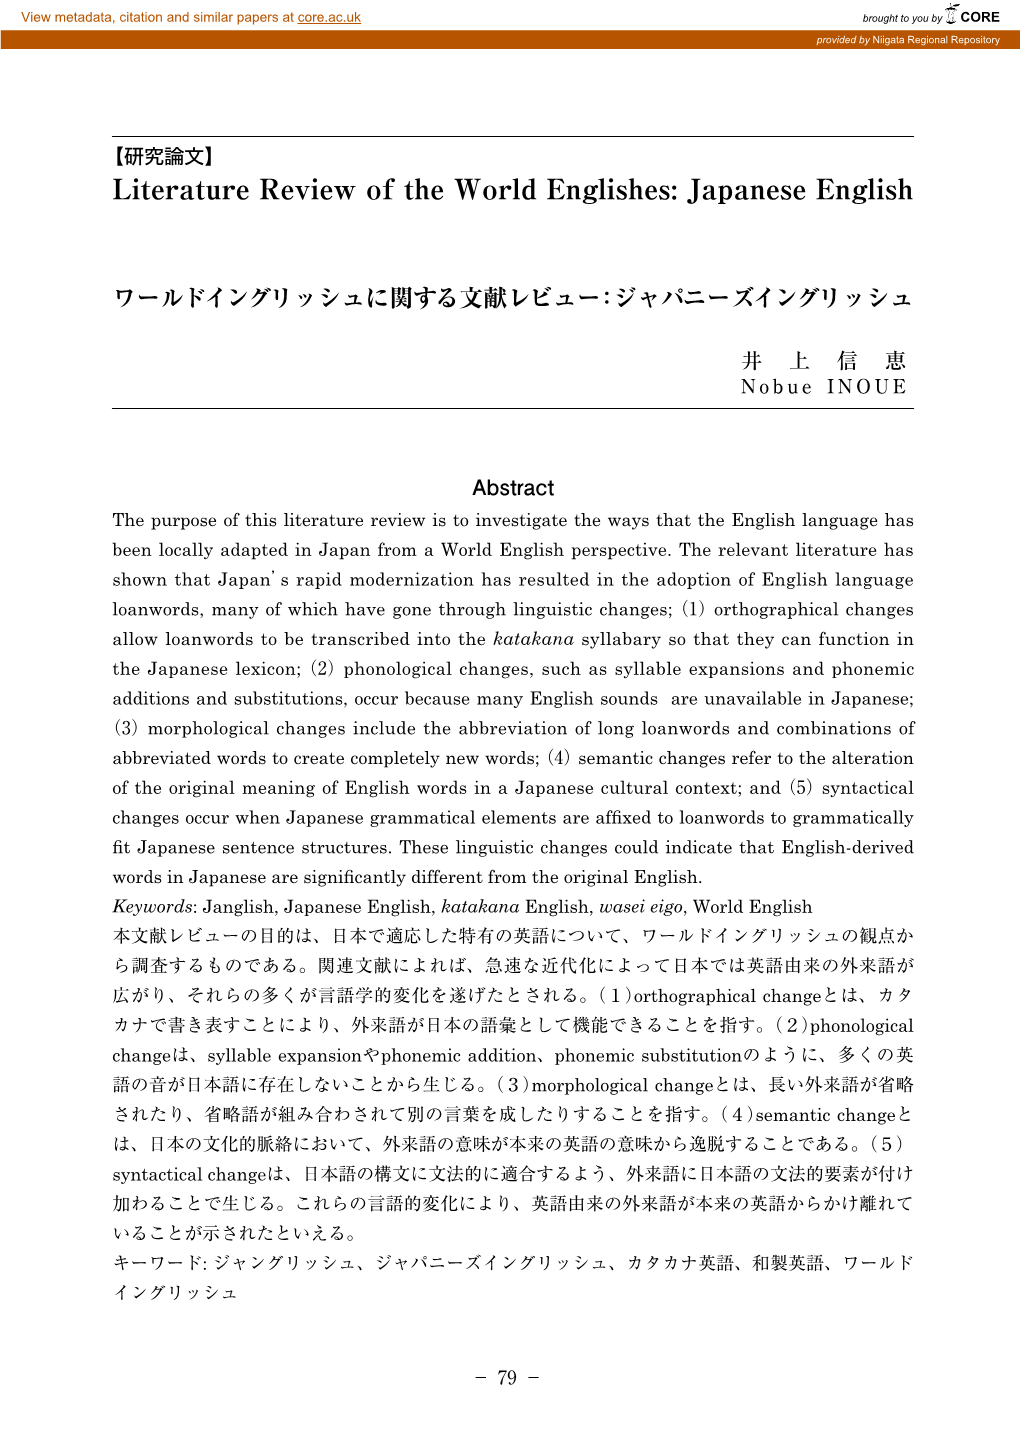 Literature Review of the World Englishes: Japanese English